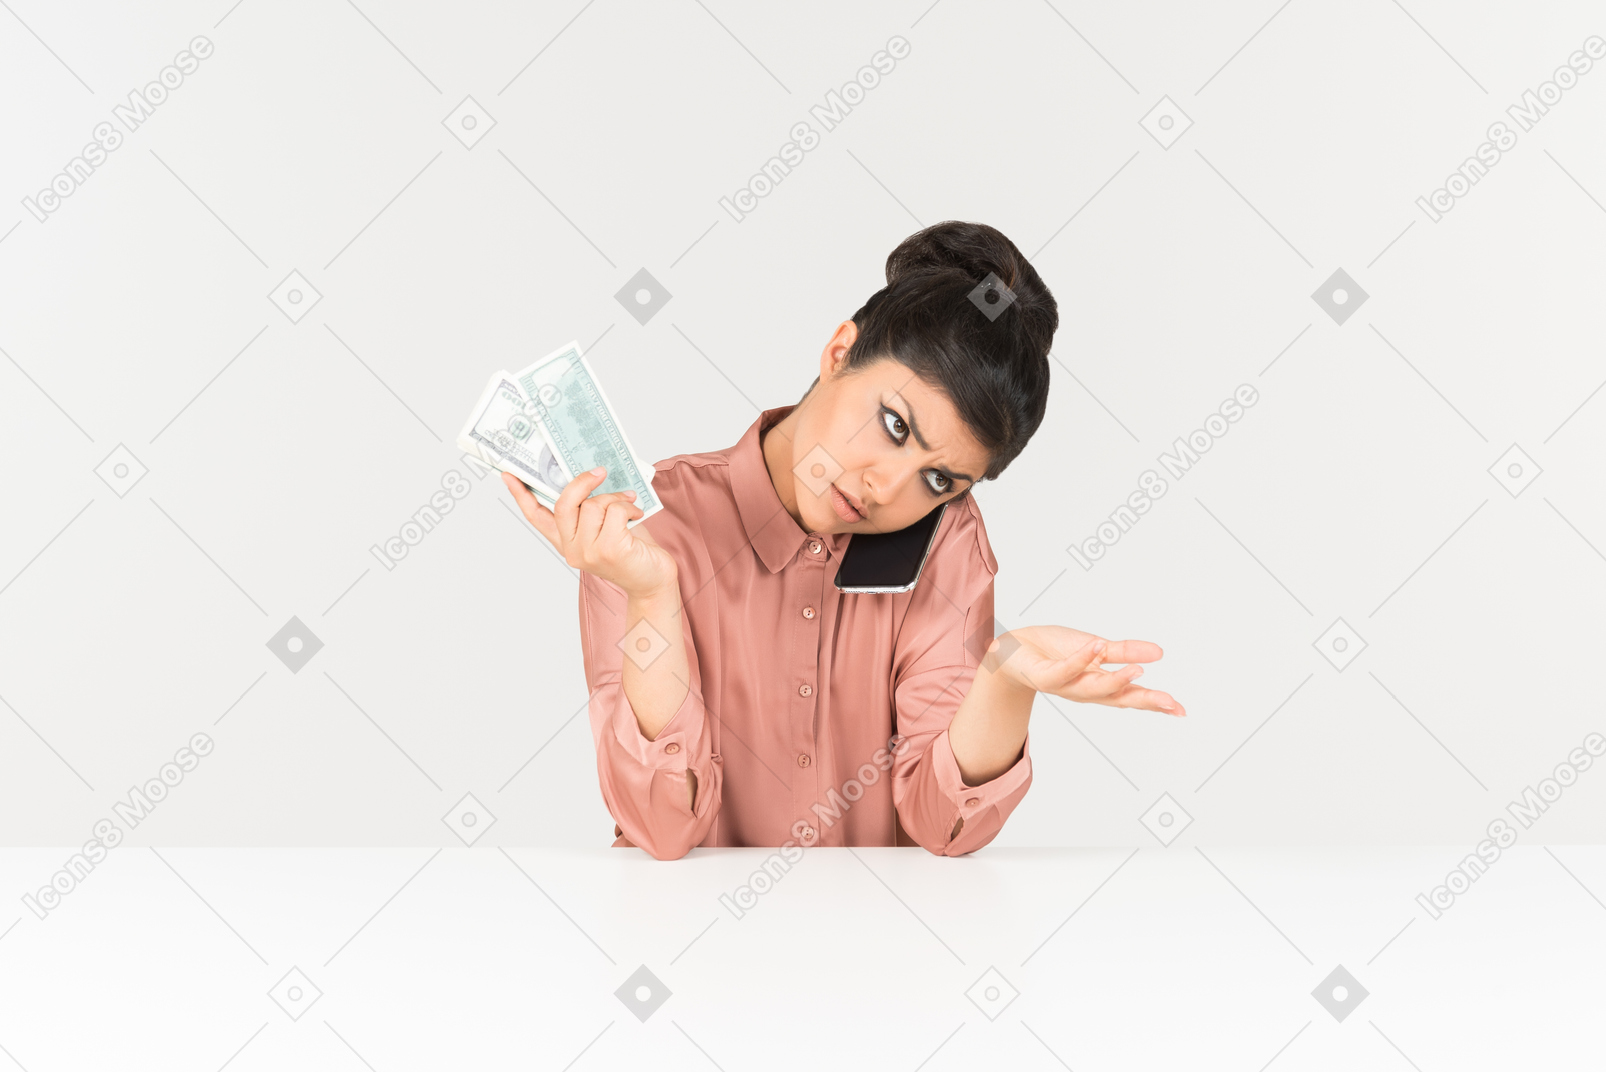 Troubled looking young indian woman holding money bills and talking on the phone